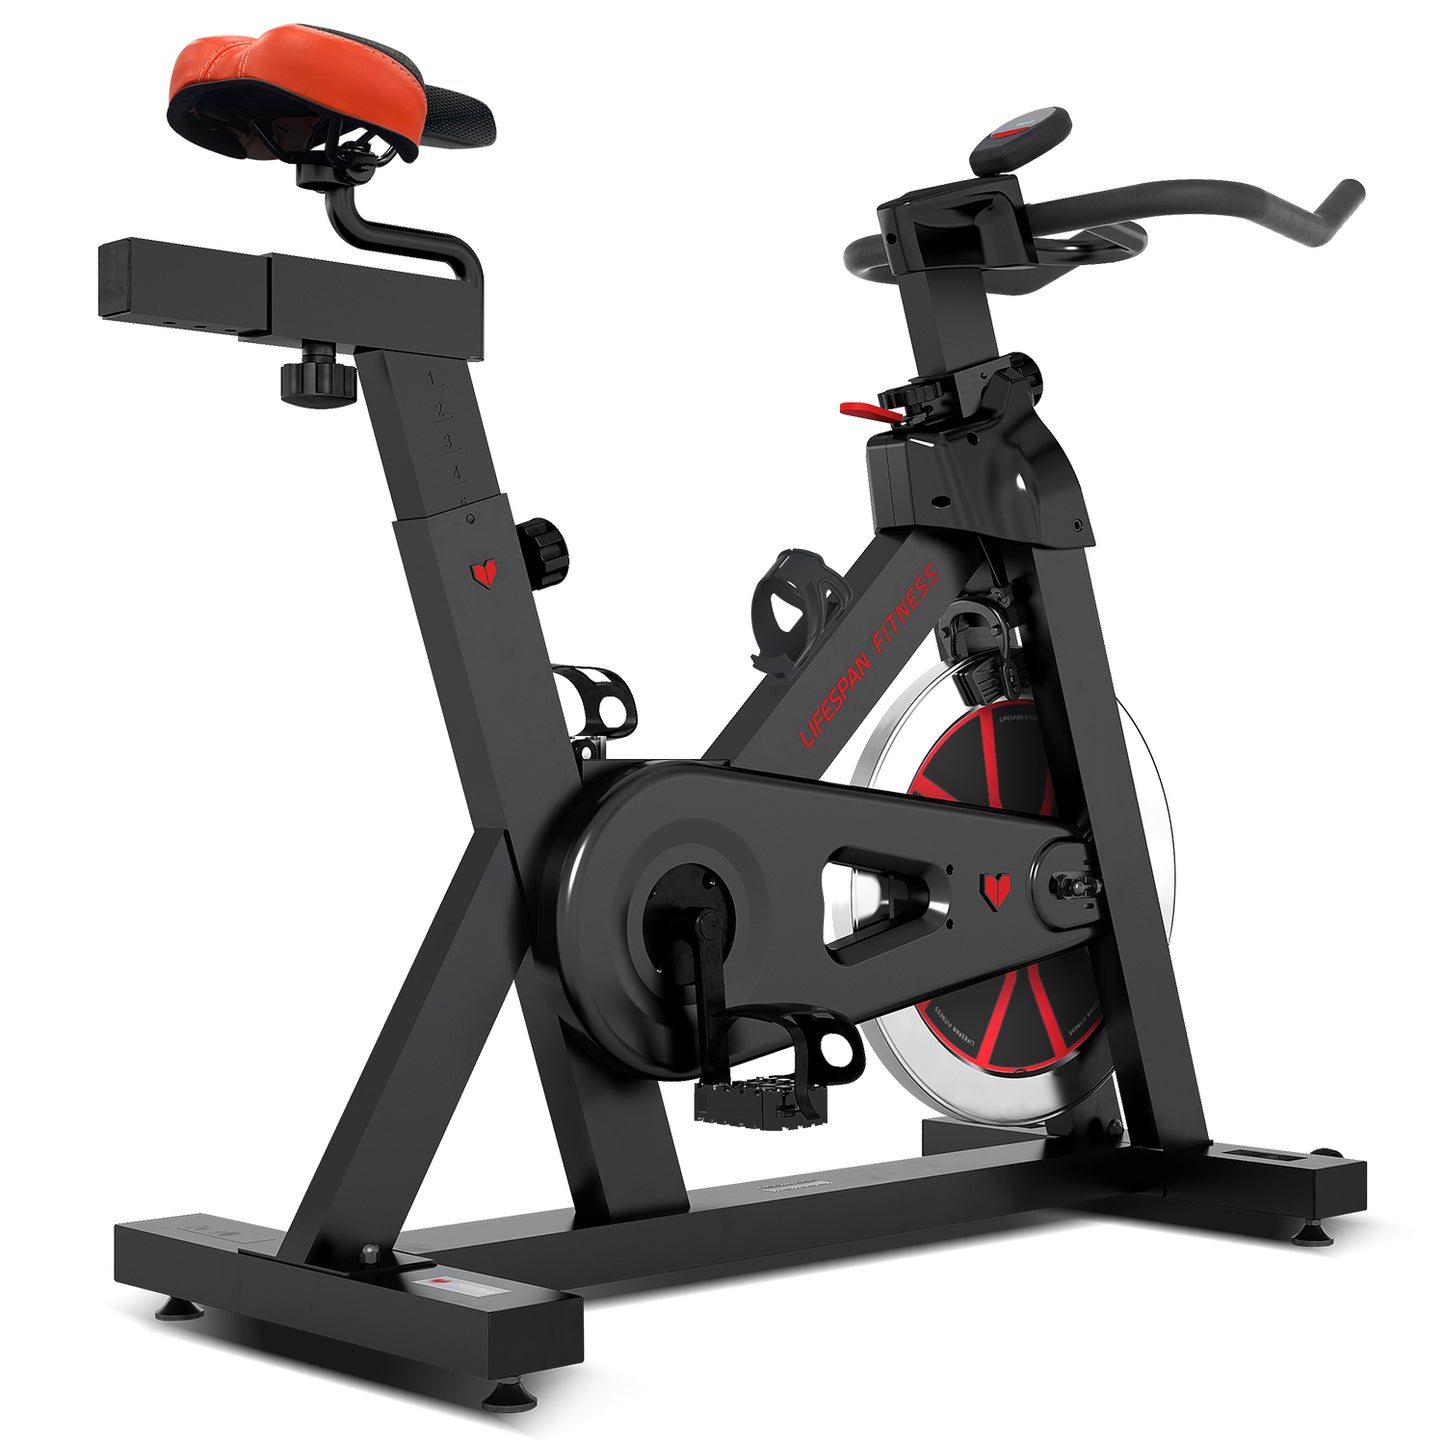 Fitness SP-310 M2 Fitness Spin Bike